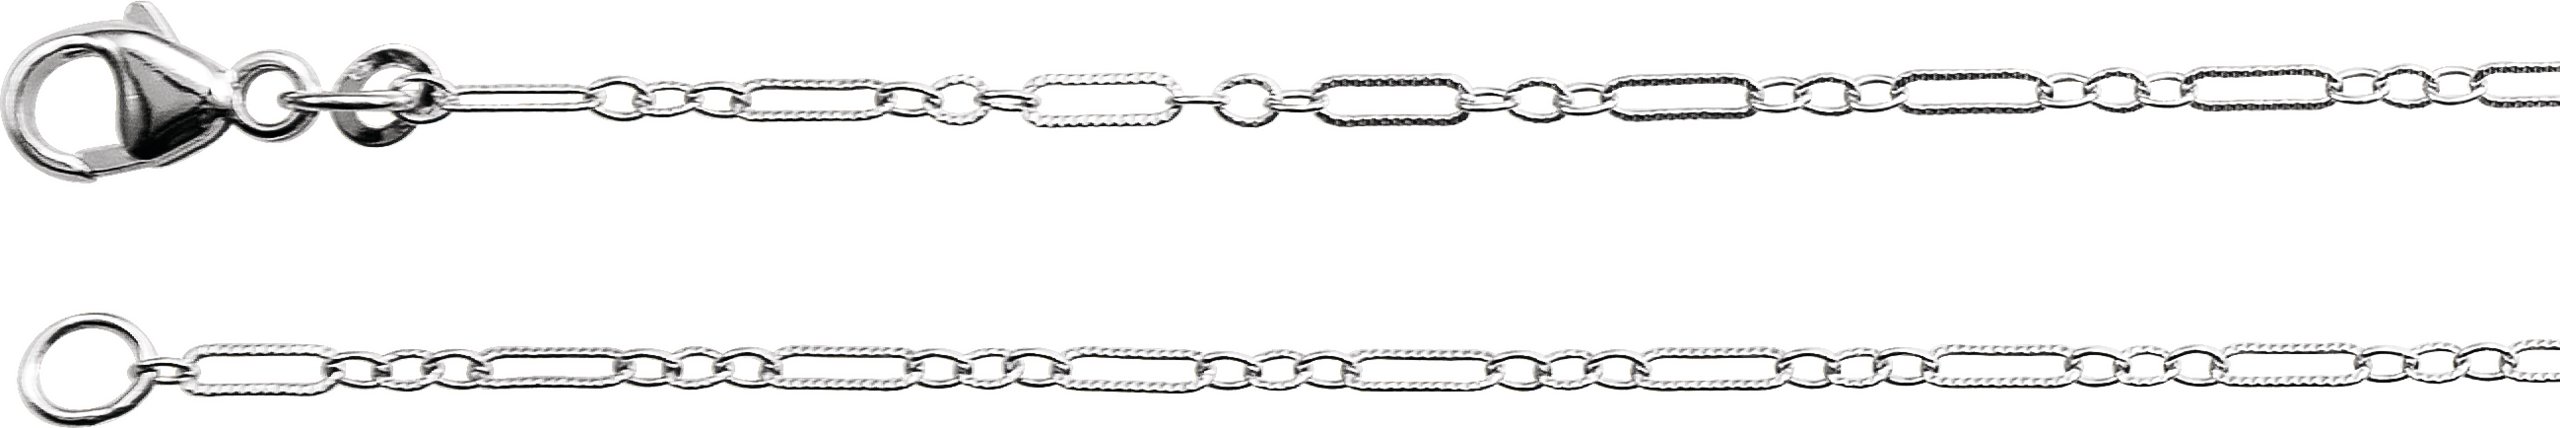 14K White 1.6 mm Knurled Figaro 24" Chain with Lobster Clasp  